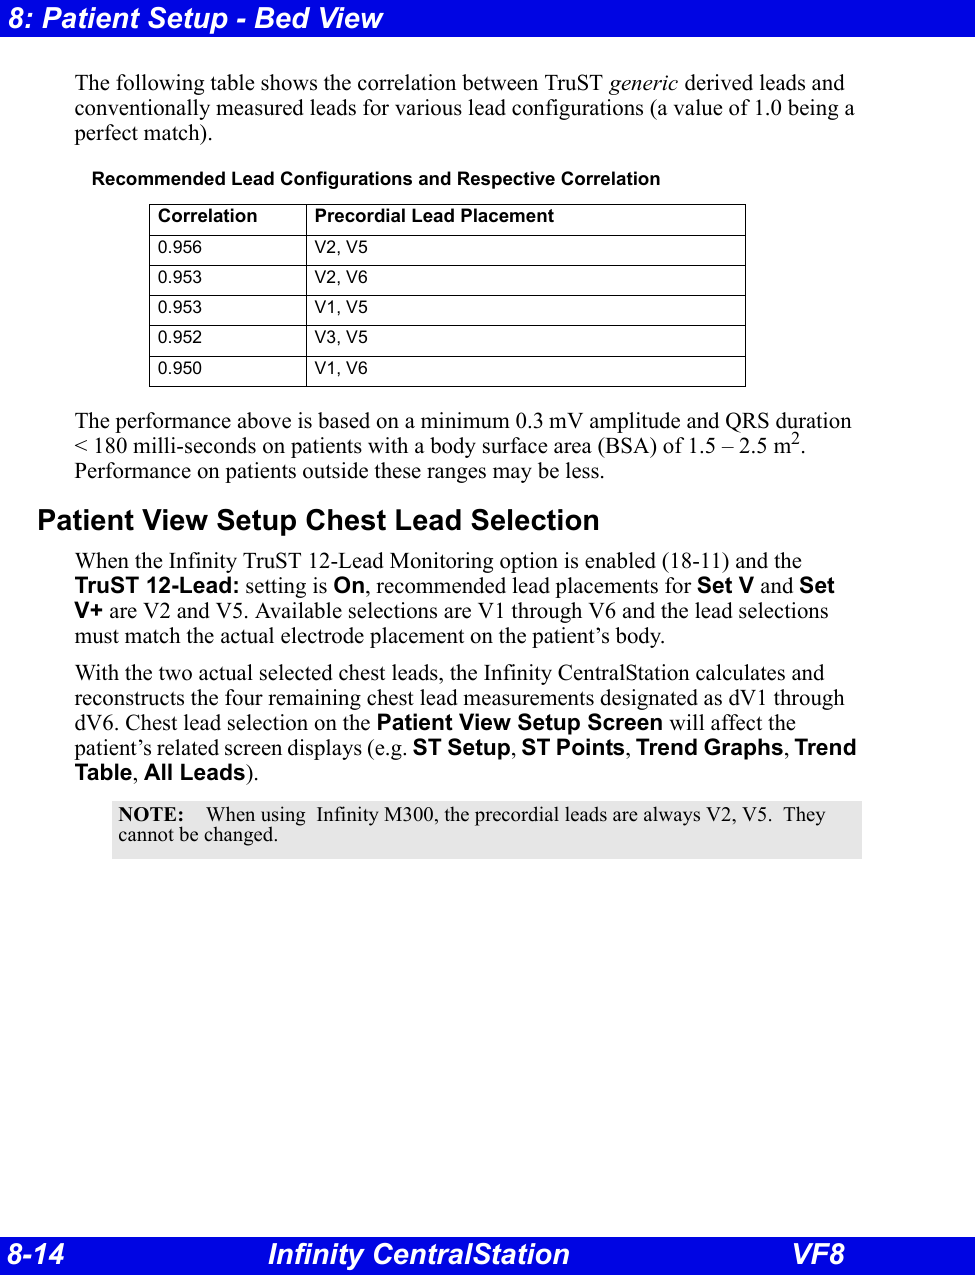 8-14 Infinity CentralStation VF88: Patient Setup - Bed ViewThe following table shows the correlation between TruST generic derived leads and conventionally measured leads for various lead configurations (a value of 1.0 being a perfect match).The performance above is based on a minimum 0.3 mV amplitude and QRS duration &lt; 180 milli-seconds on patients with a body surface area (BSA) of 1.5 – 2.5 m2. Performance on patients outside these ranges may be less.Patient View Setup Chest Lead SelectionWhen the Infinity TruST 12-Lead Monitoring option is enabled (18-11) and the TruST 12-Lead: setting is On, recommended lead placements for Set V and Set V+ are V2 and V5. Available selections are V1 through V6 and the lead selections must match the actual electrode placement on the patient’s body. With the two actual selected chest leads, the Infinity CentralStation calculates and reconstructs the four remaining chest lead measurements designated as dV1 through dV6. Chest lead selection on the Patient View Setup Screen will affect the patient’s related screen displays (e.g. ST Setup, ST Points, Trend Graphs, Trend Table, All Leads).Recommended Lead Configurations and Respective CorrelationCorrelation Precordial Lead Placement0.956 V2, V50.953 V2, V60.953 V1, V50.952 V3, V50.950 V1, V6NOTE: When using  Infinity M300, the precordial leads are always V2, V5.  They cannot be changed.